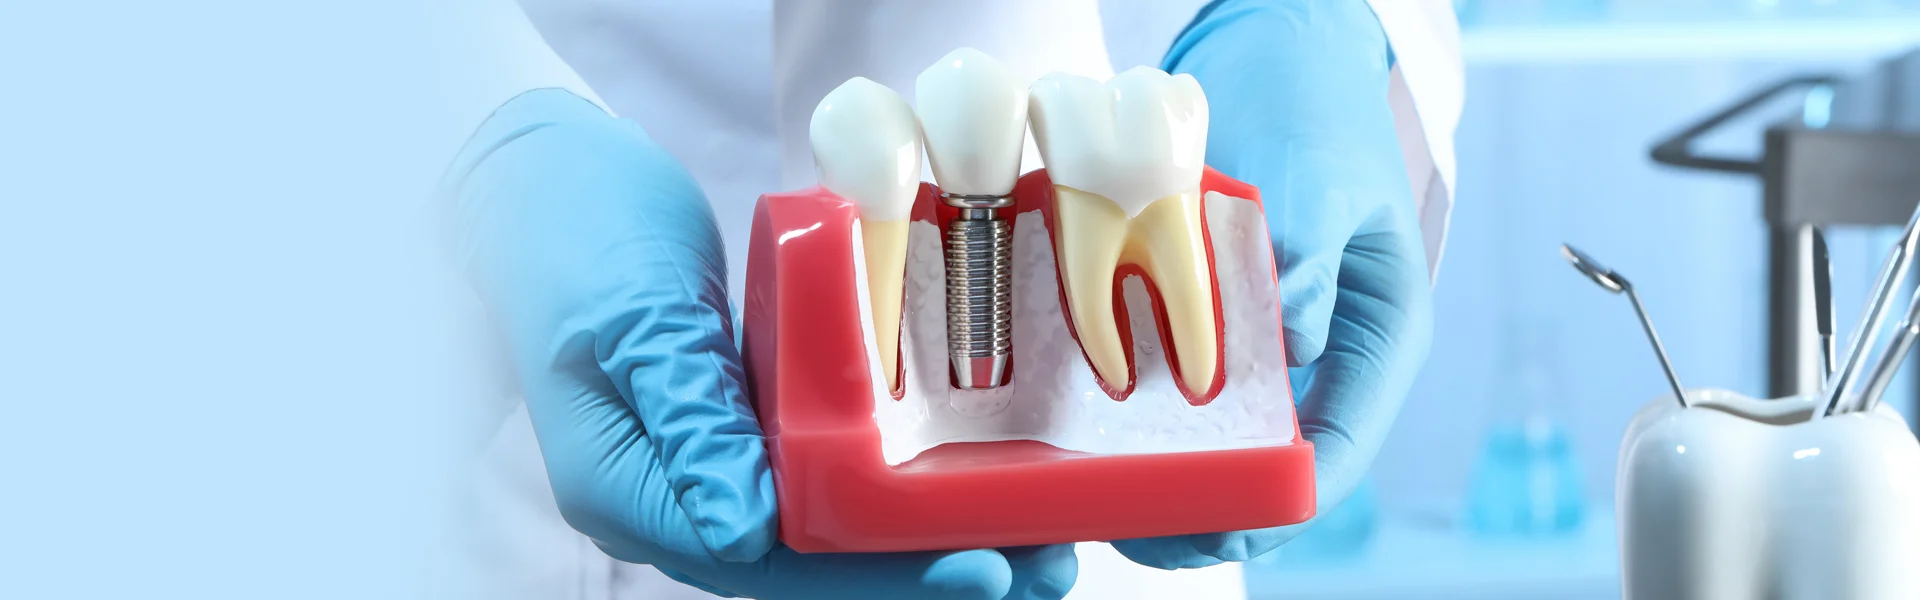 What Can I Eat After a Dental Implant Surgery?